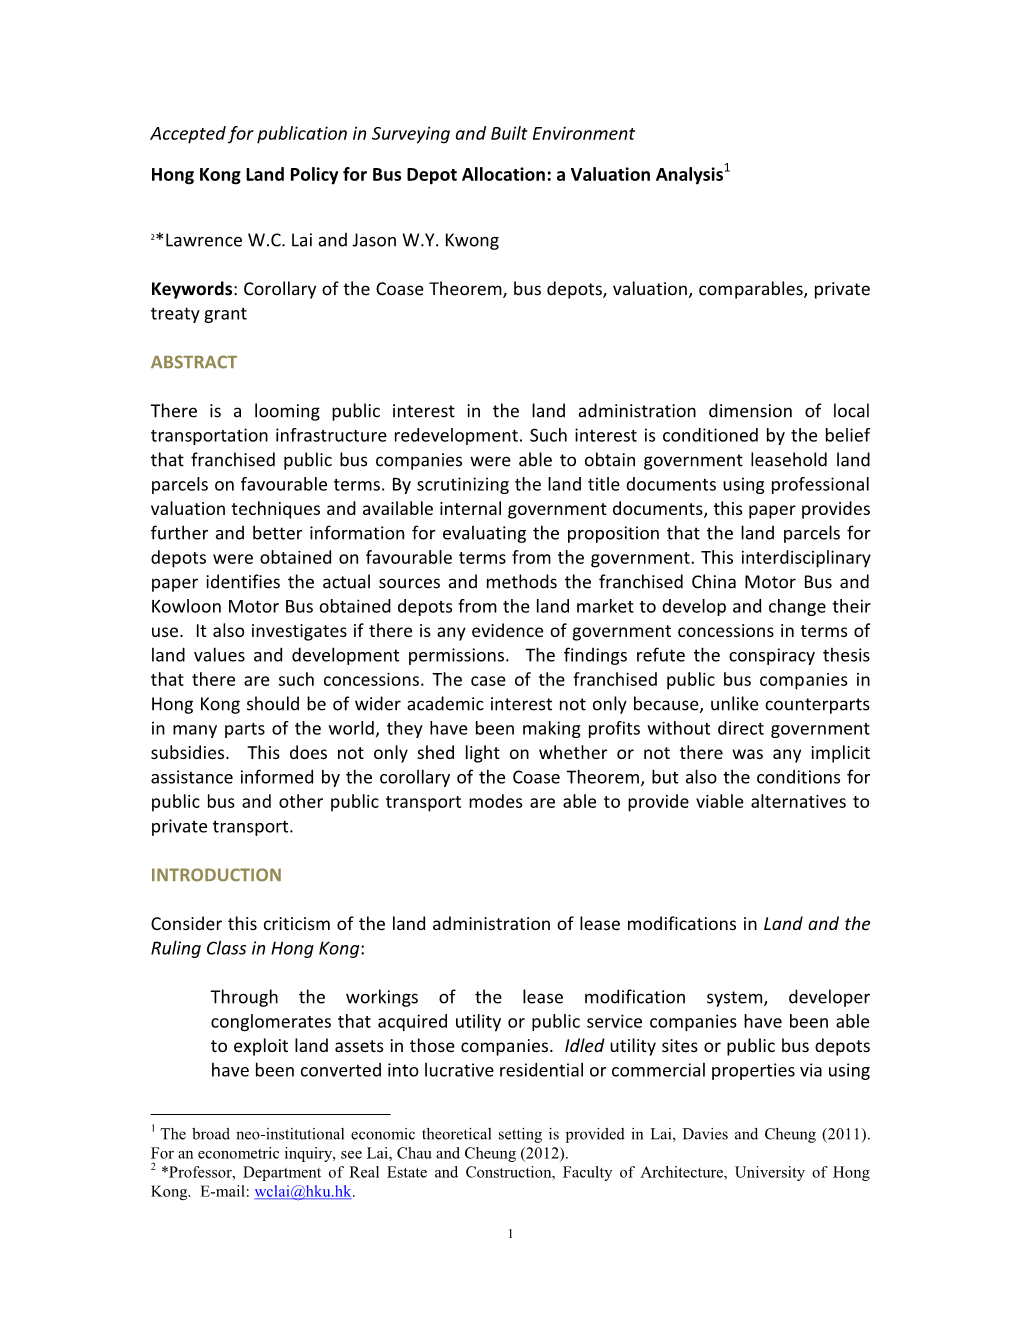 Accepted for Publication in Surveying and Built Environment Hong Kong